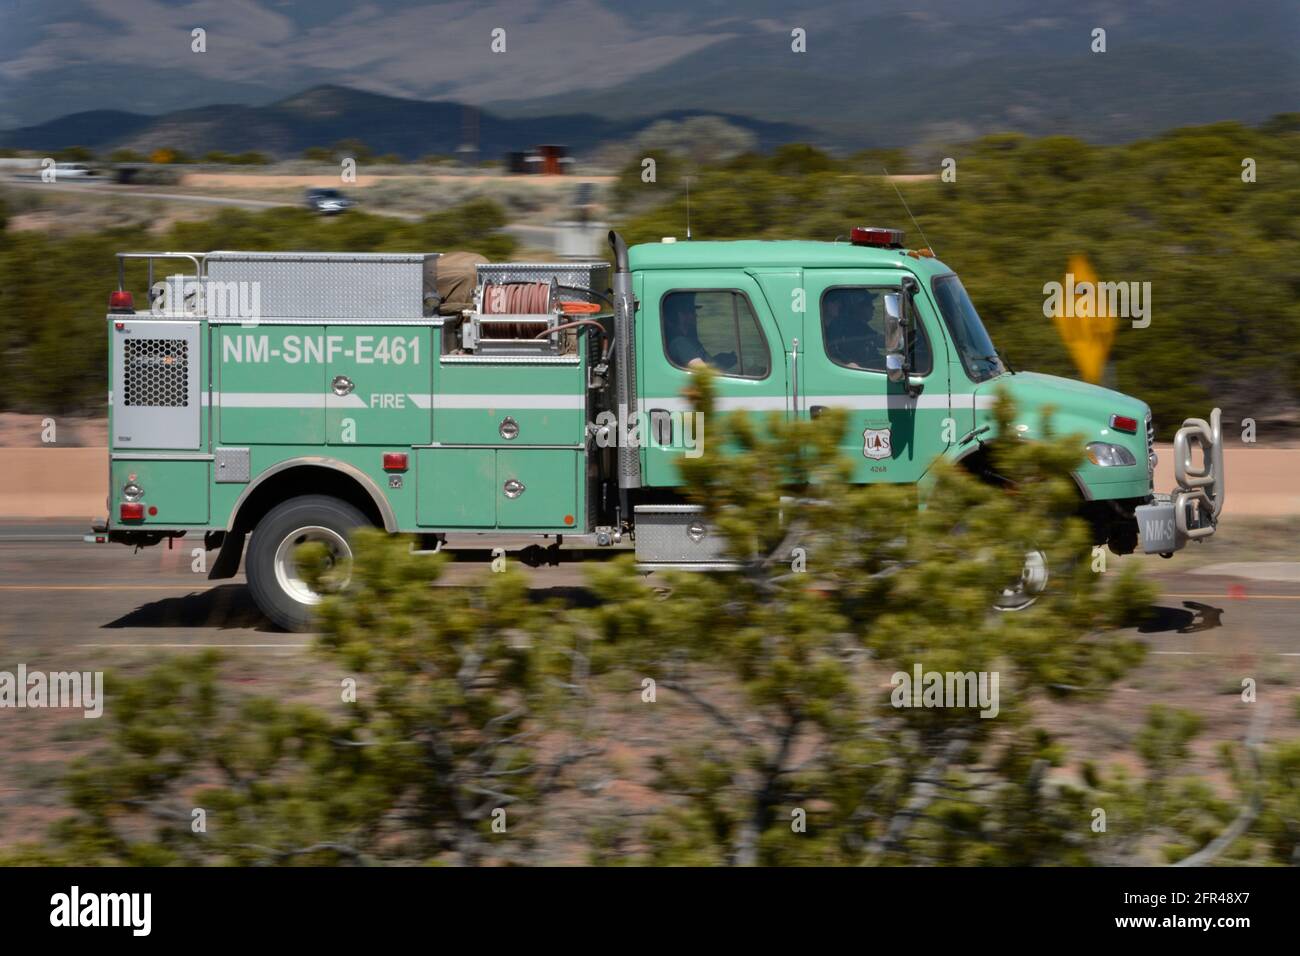 A United States Forest Service truck with firefighters aboard rushes to the site of a fire in New Mexico. Stock Photo